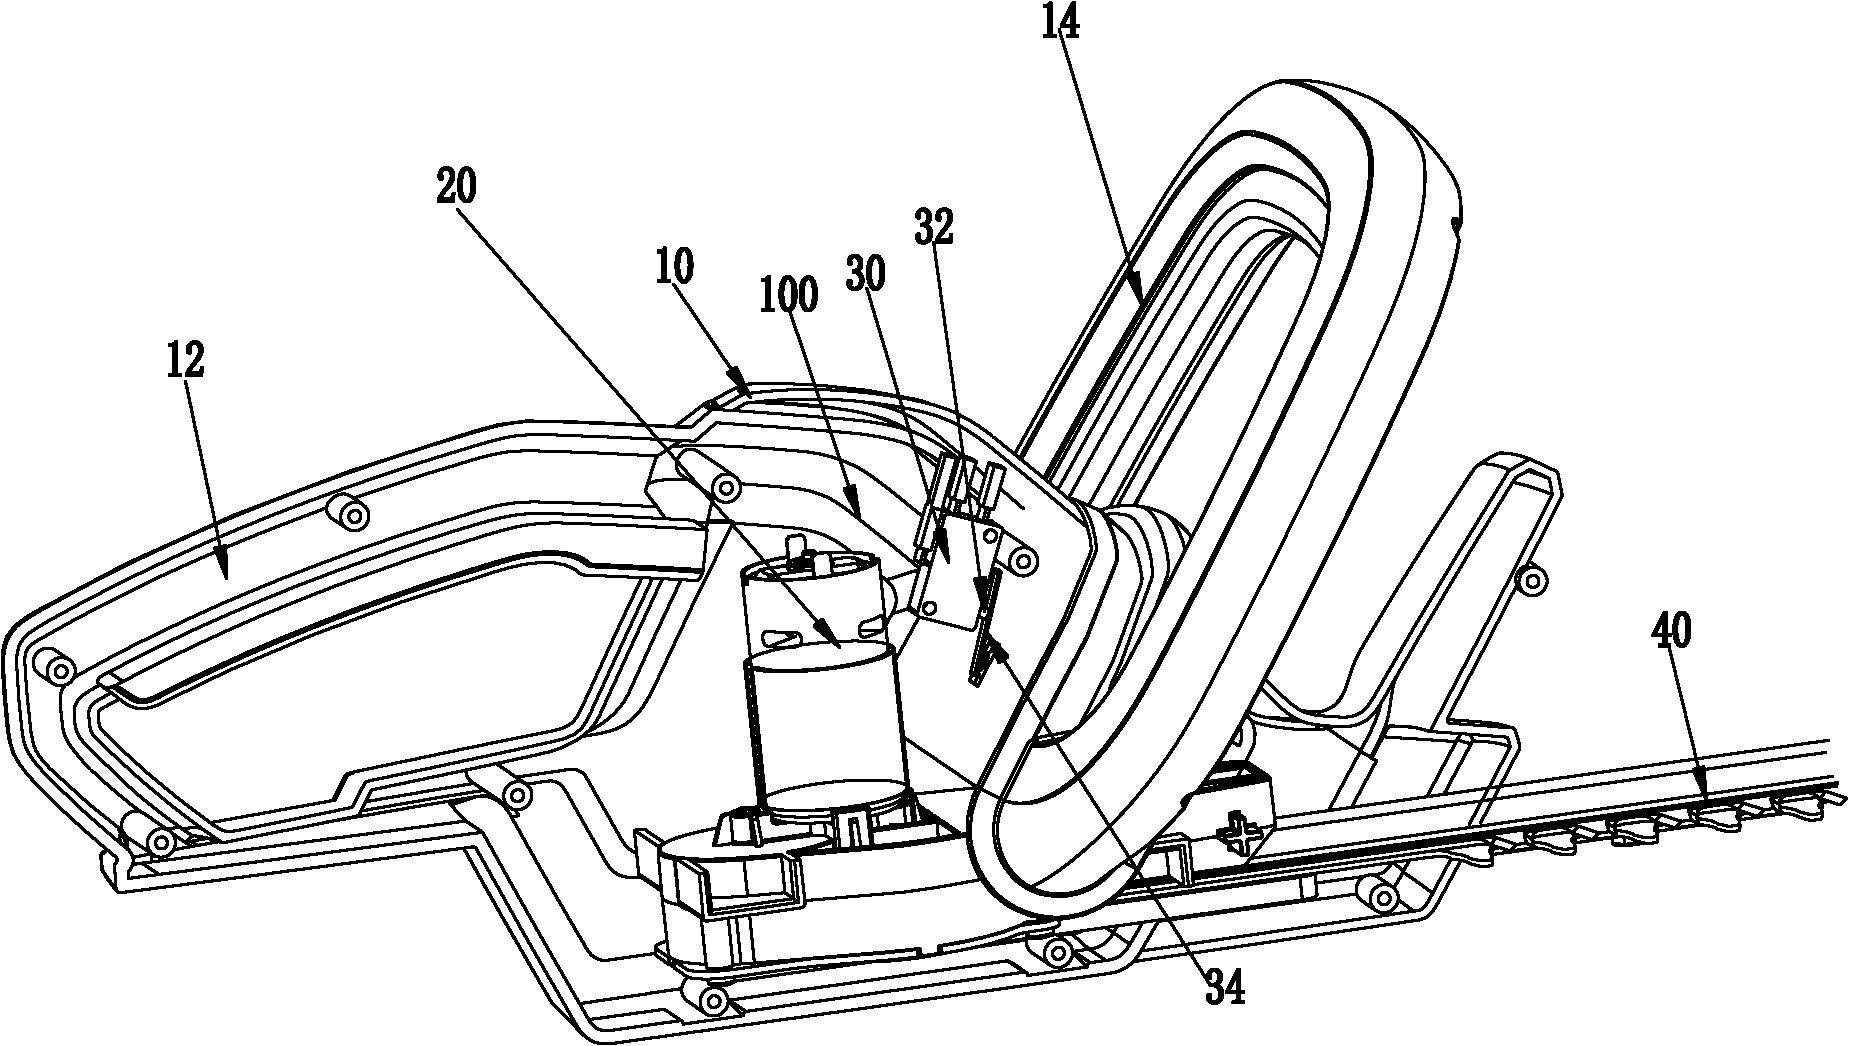 Handheld electric tool with improved trigger